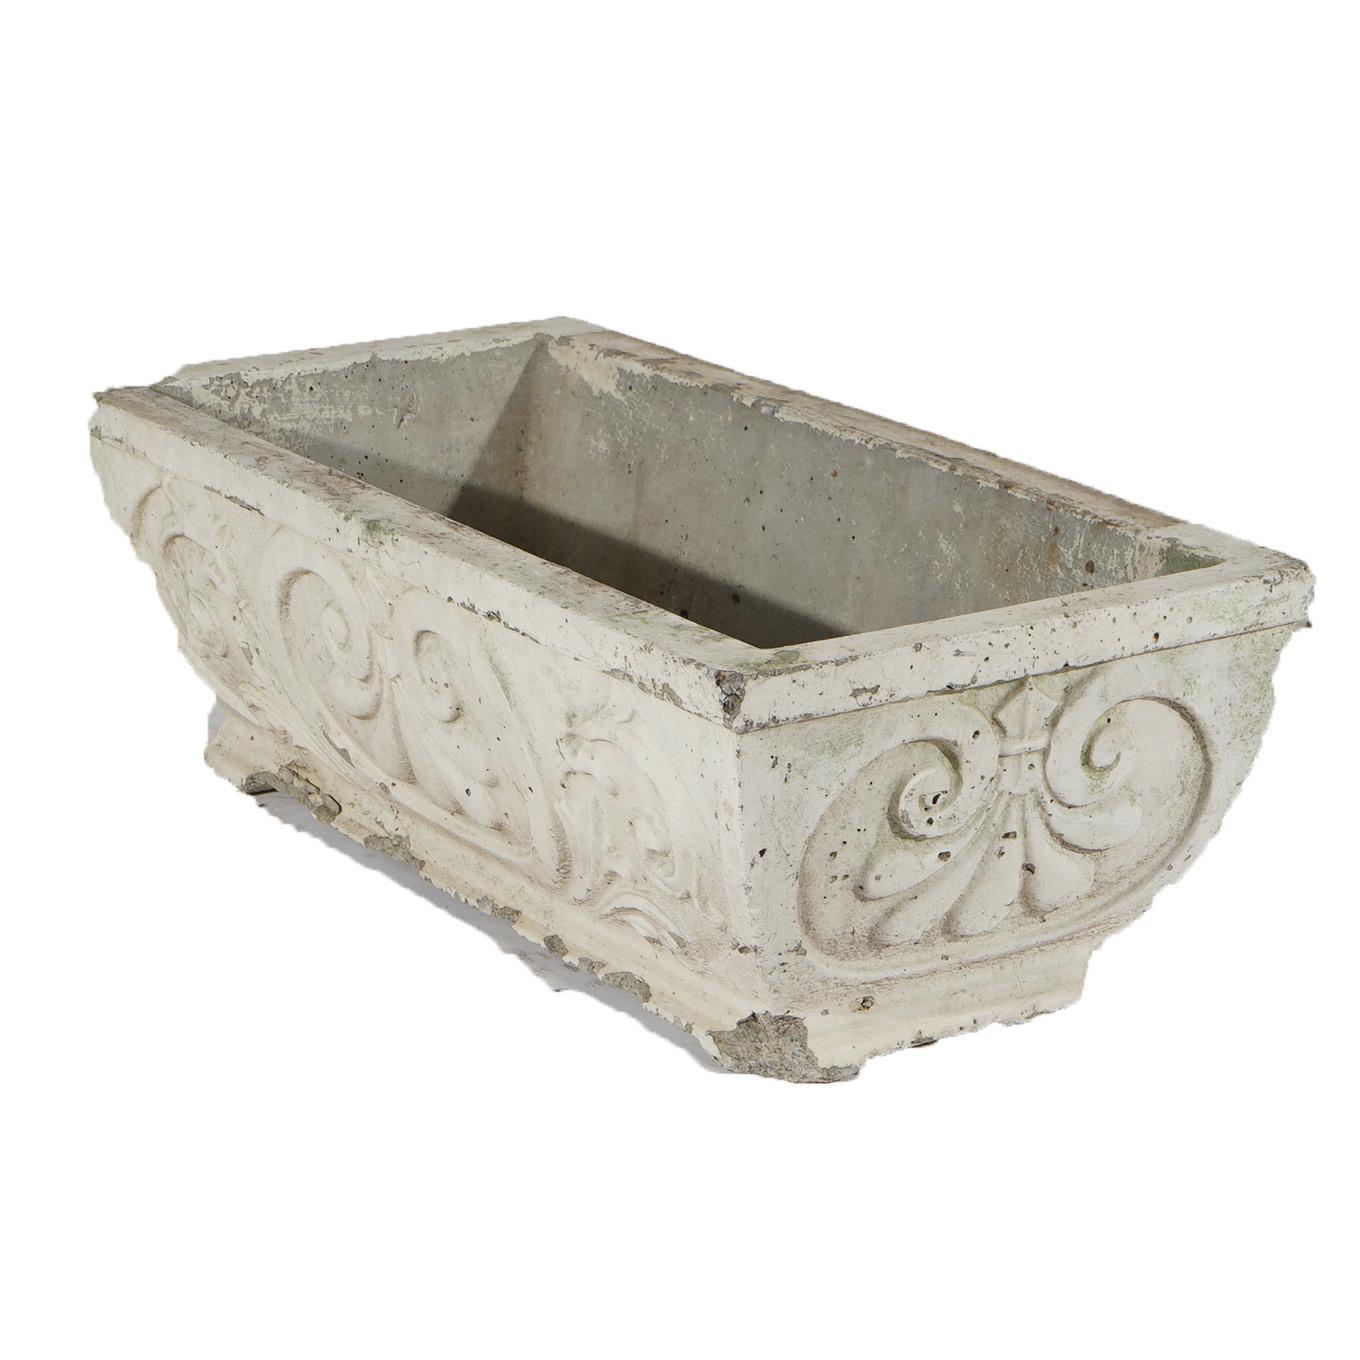 ***Ask About Reduced In-House Shipping Rates - Reliable Service & Fully Insured***
Cast Hardstone Long Garden or Patio Planter with Scroll Work in Relief 20th C

Measures- 9.5''H x 28''W x 13.25''D